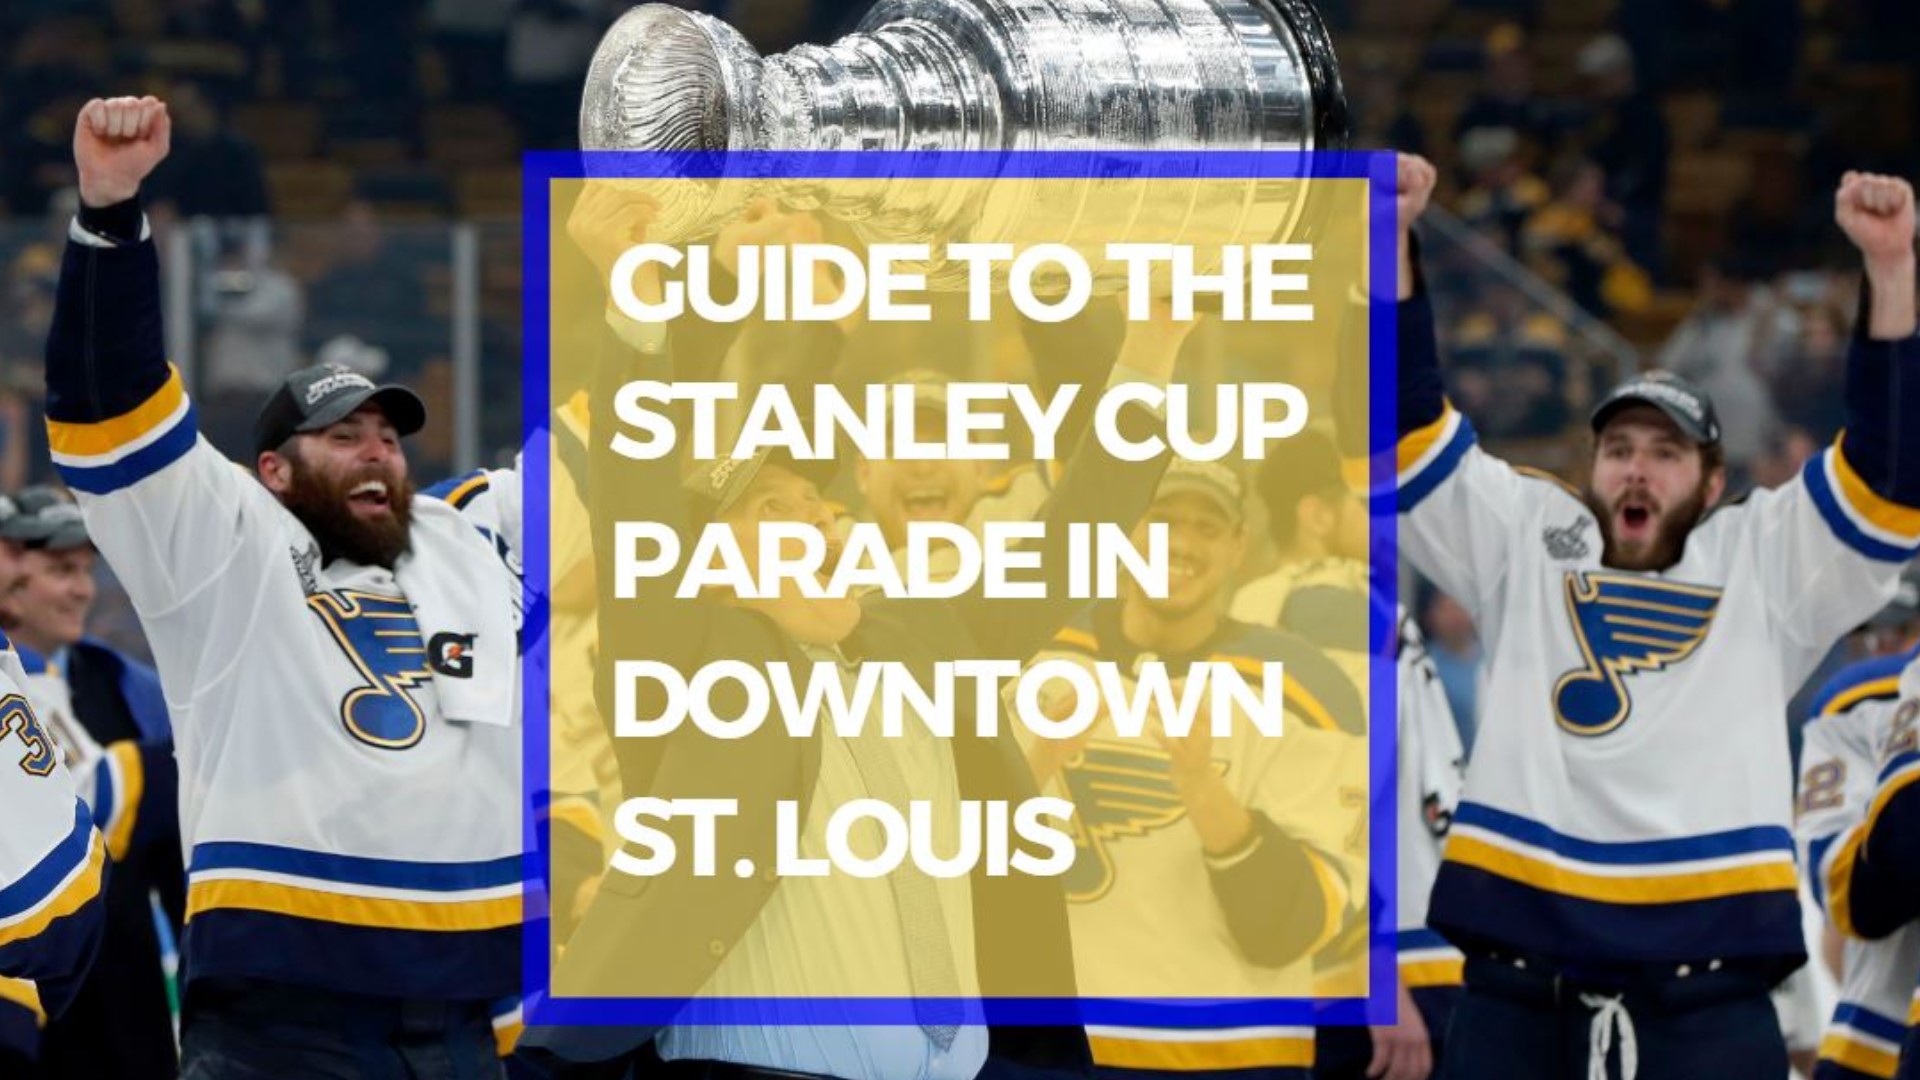 Your guide to the Stanley Cup parade in downtown St. Louis